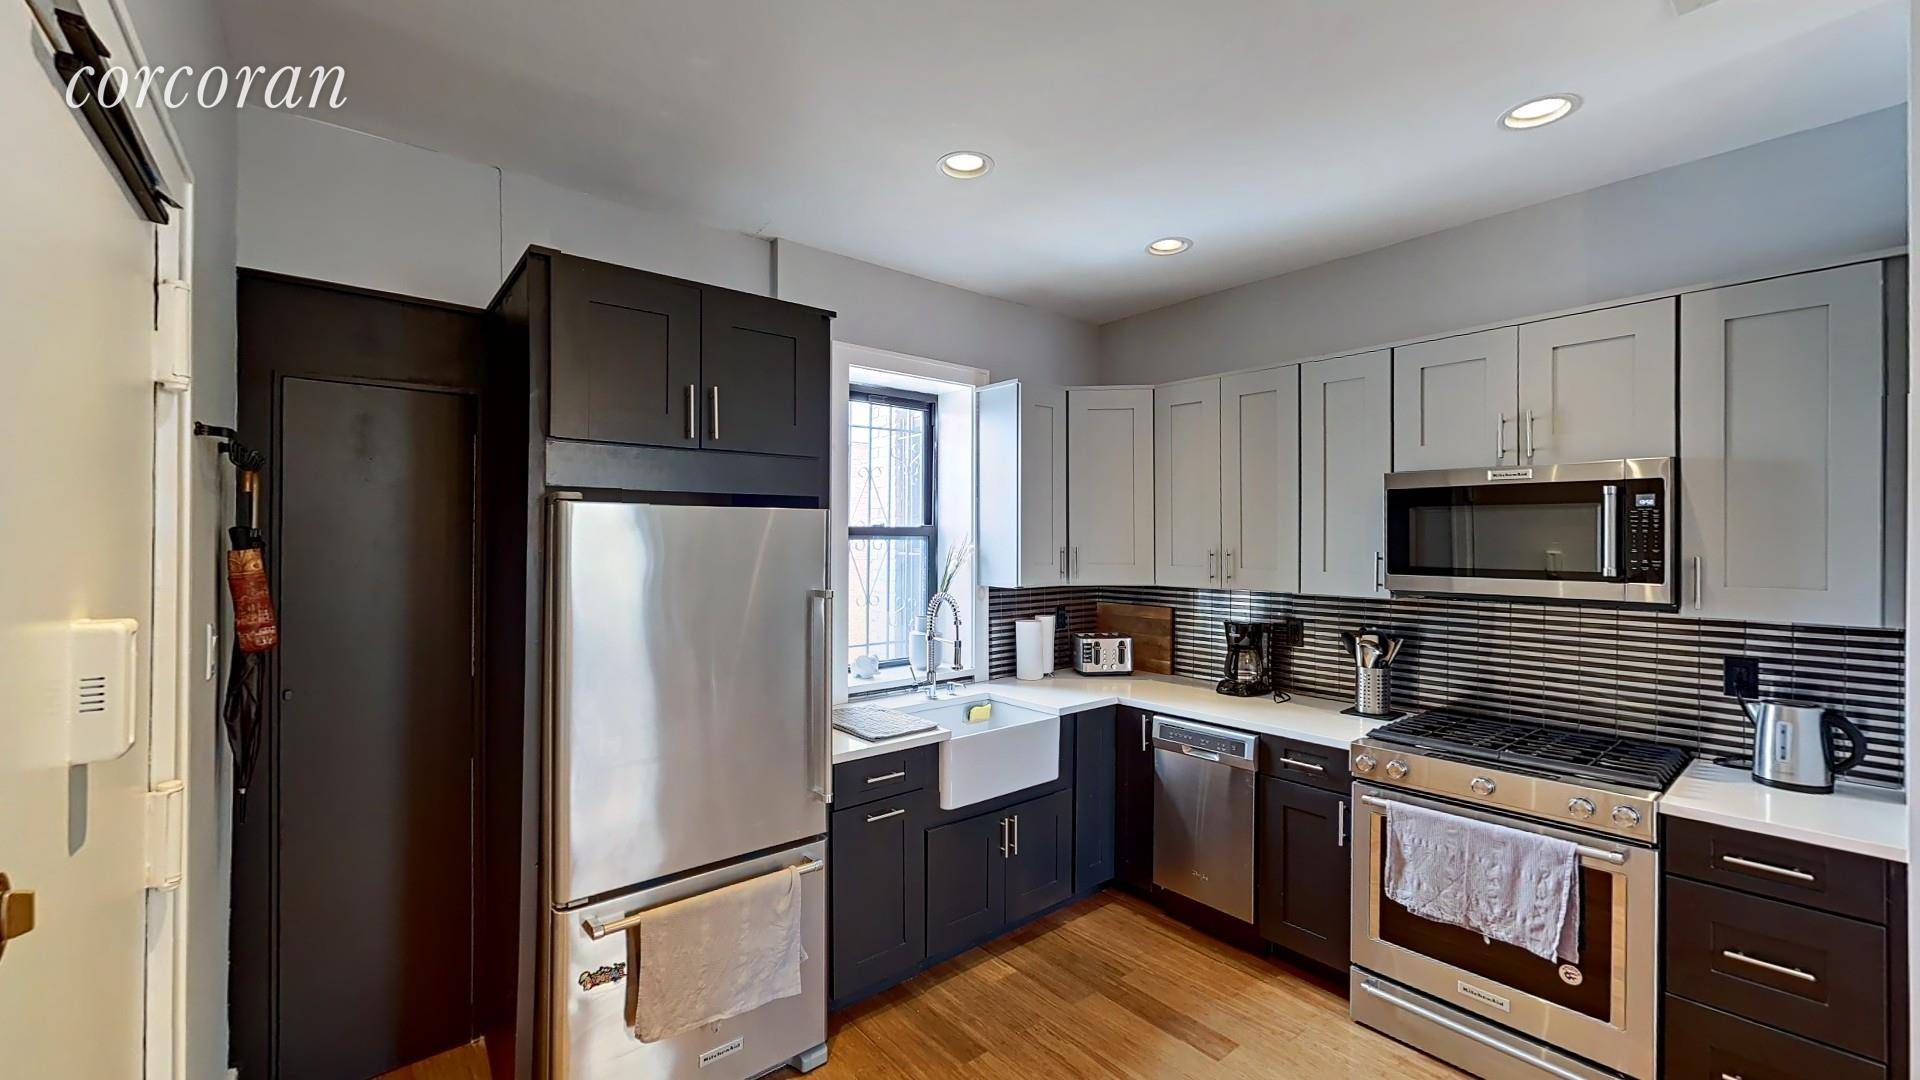 Three large bedrooms, two modern bathrooms, W D in unit, hardwood floors, open kitchen with quartz counters, dishwasher and stainless appliances, tiled backsplash.